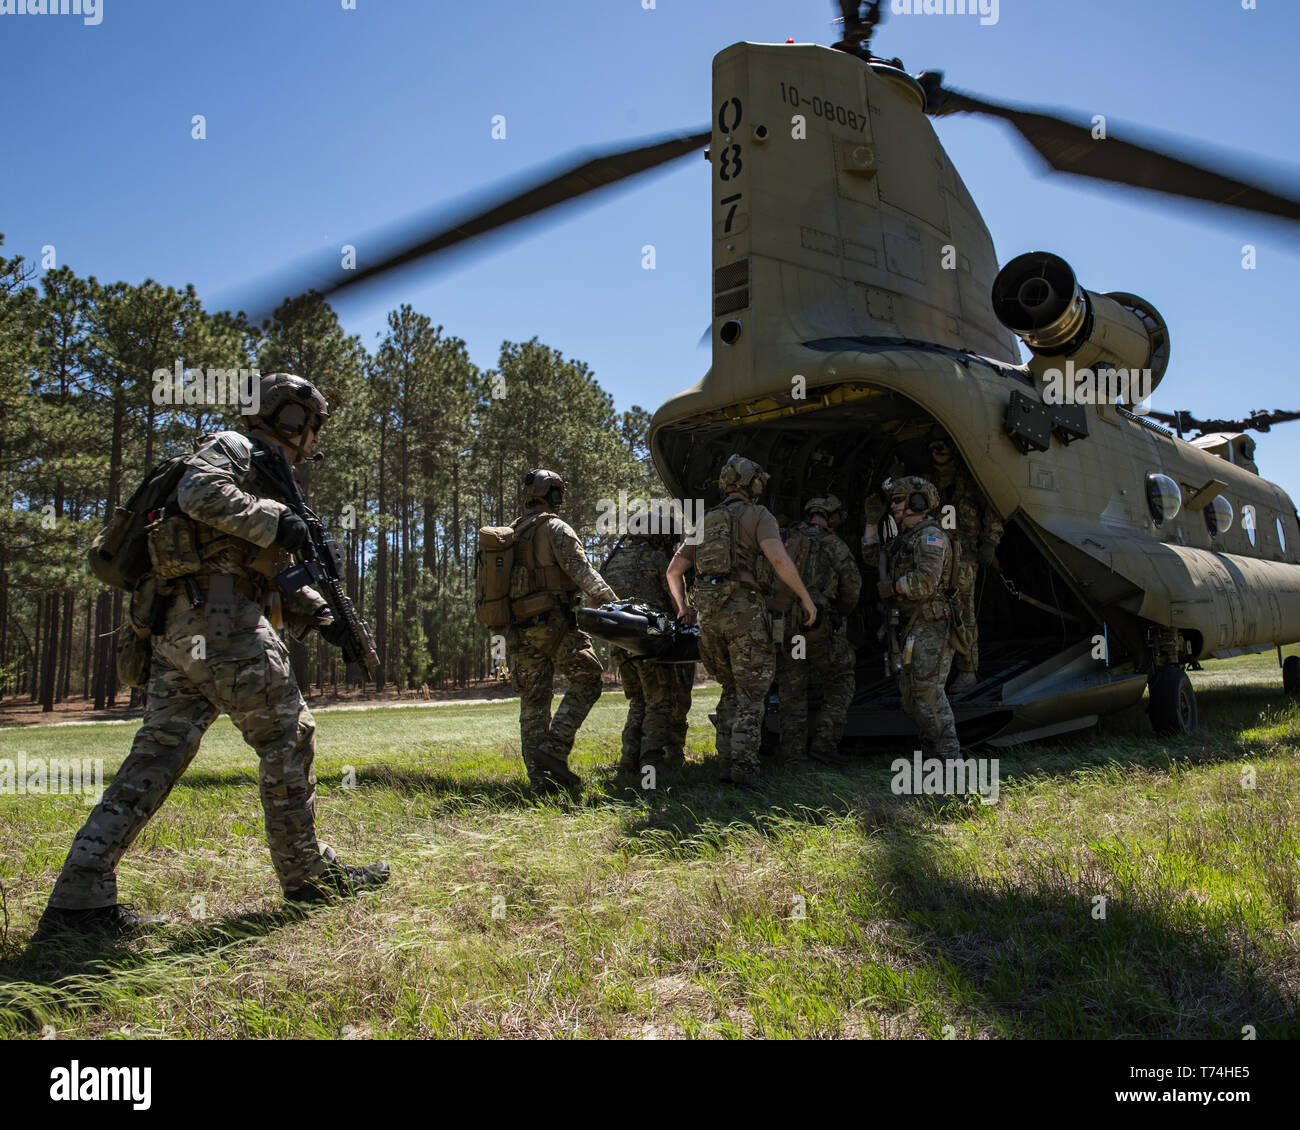 Green Berets assigned to 3rd Special Forces Group (Airborne) enter the back of a CH-47 Chinook helicopter after conducting a raid during a routine training mission April 10, 2019 at Camp Mackal, NC. The Green Berets focused on utilizing new communication systems and casualty care during the training mission. (U.S. Army photo by Sgt. Steven Lewis) Stock Photo